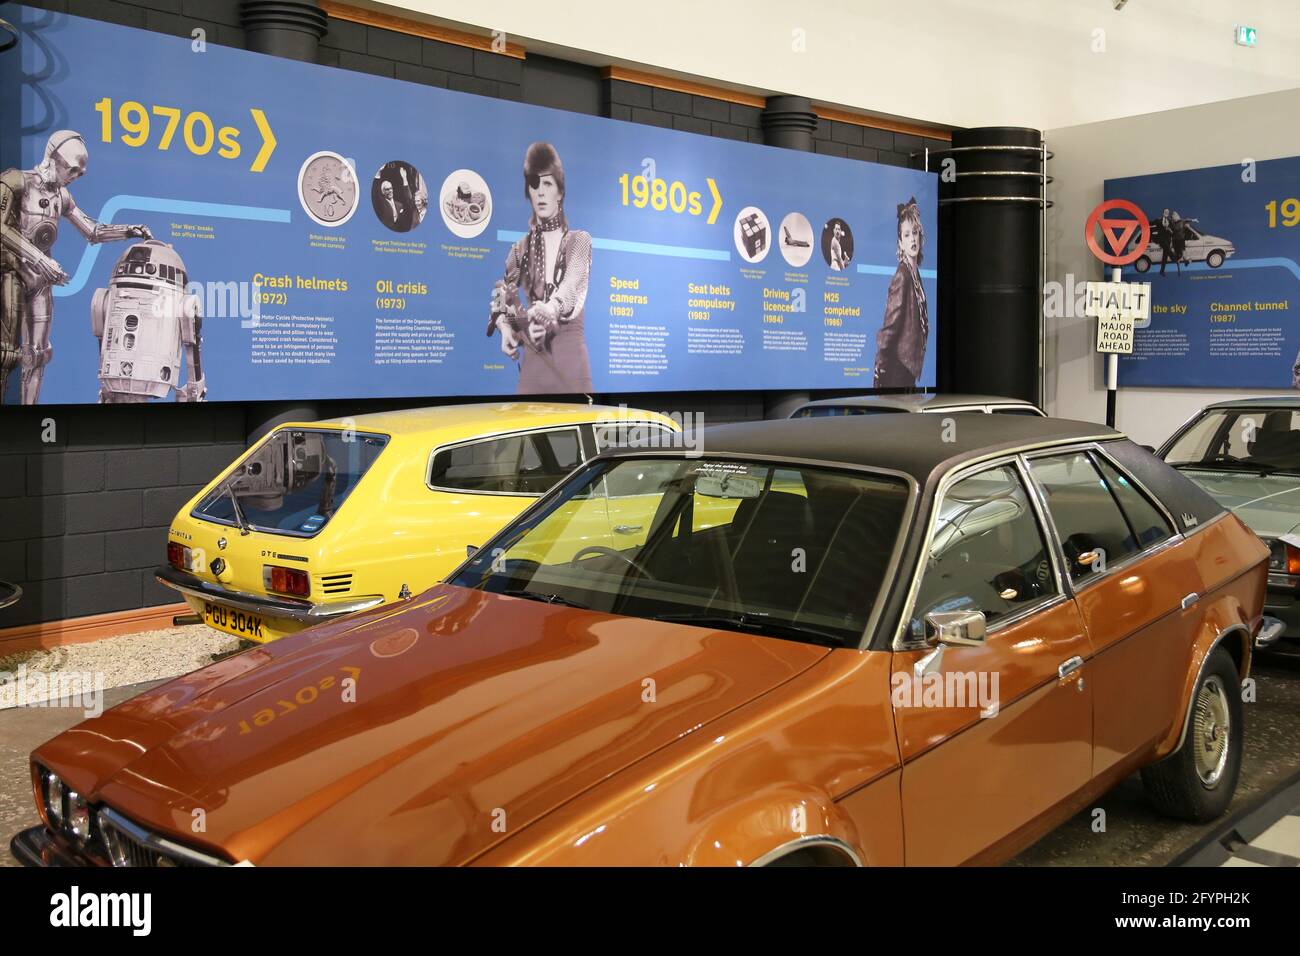 Cars from the 1970's, Time Road, British Motor Museum, Gaydon, Warwick, West Midlands, England, Great Britain, UK, Europe Stock Photo